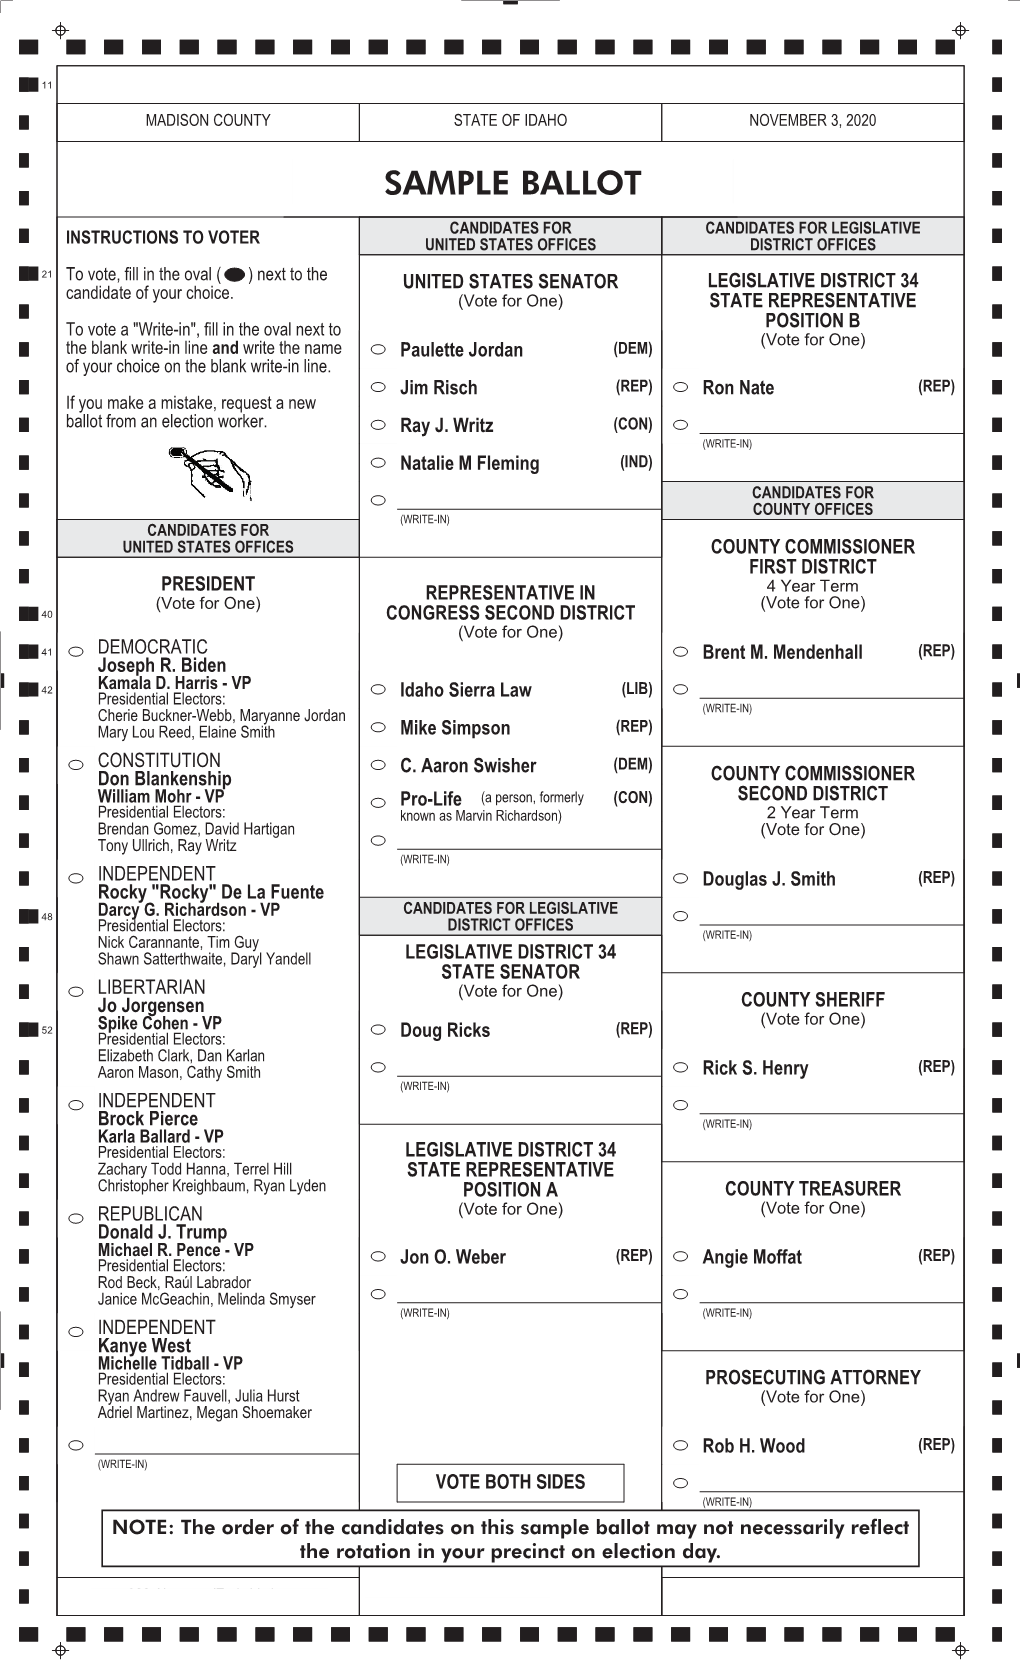 Sample Ballot May Not Necessarily Reflect the Rotationofficial in STAMP Your BOX Precinct on Election Day